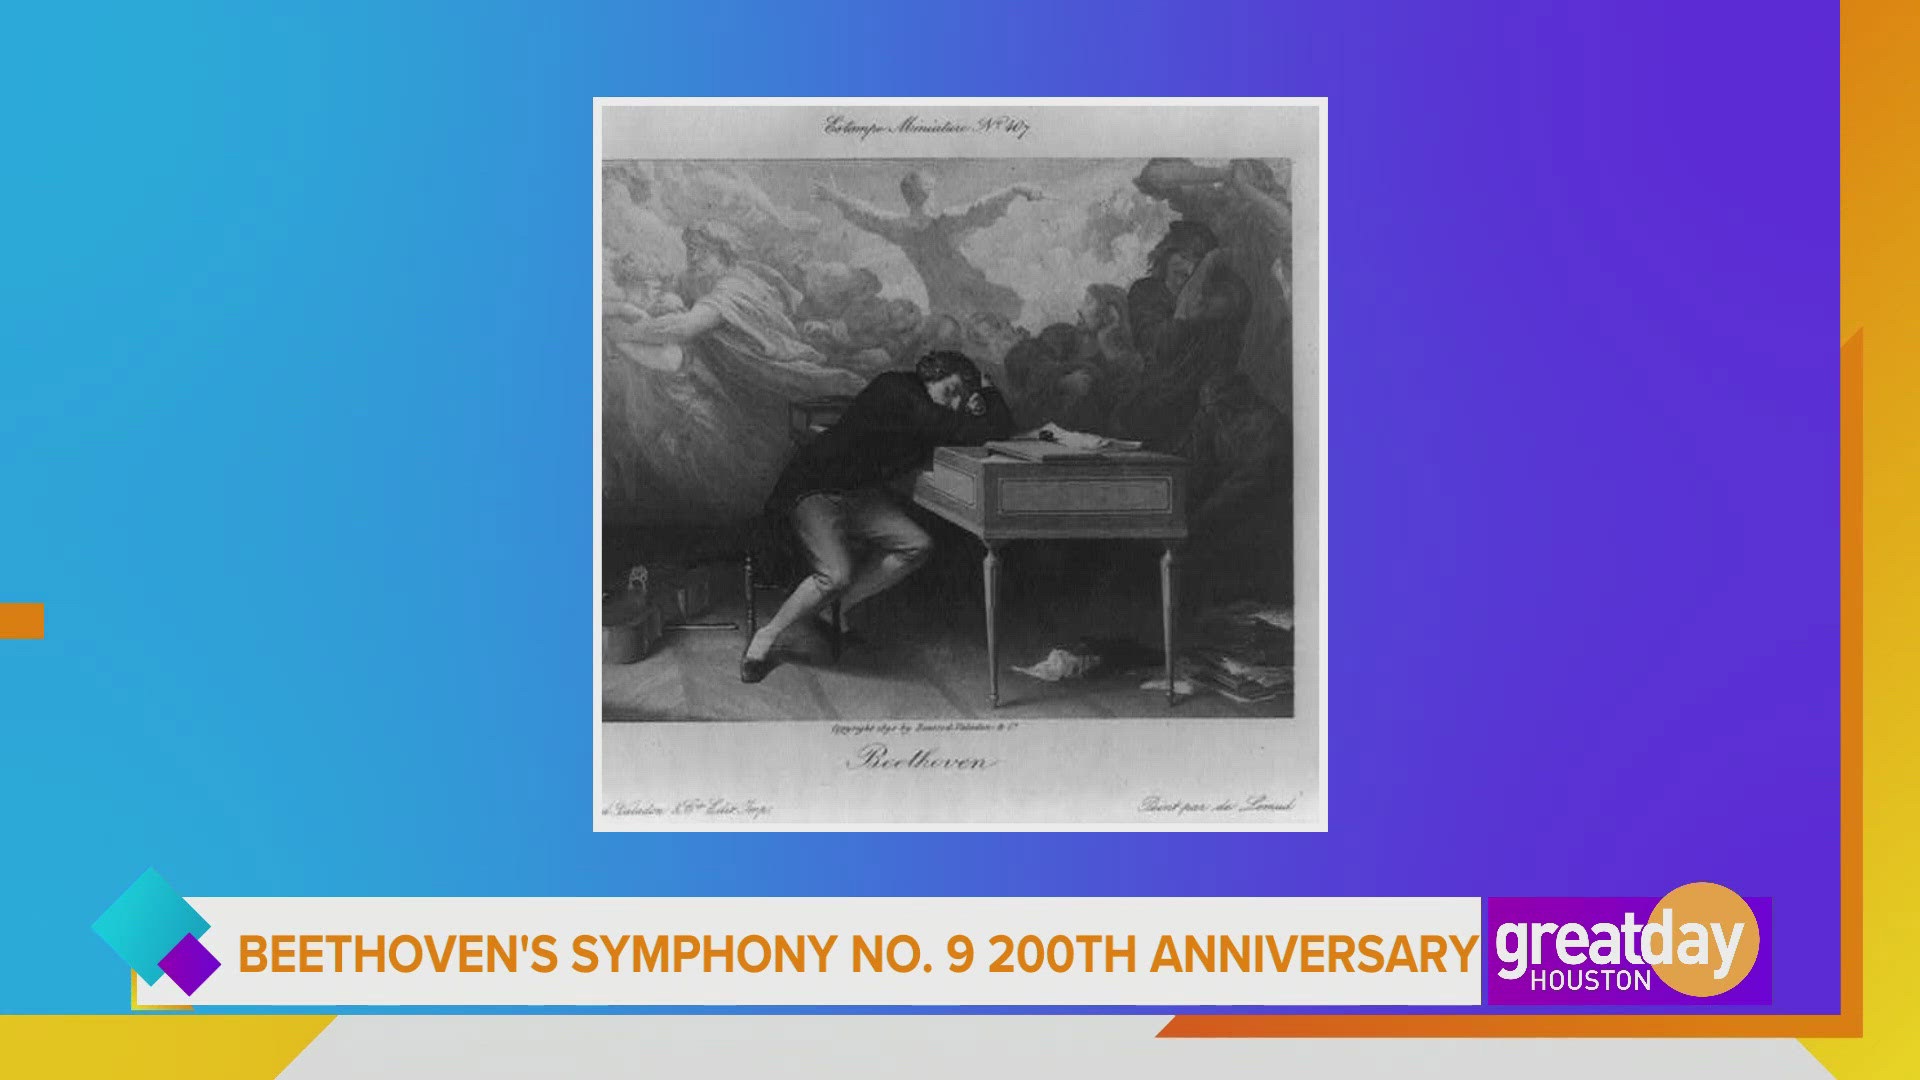 Today marks the 200th anniversary of Beethoven's Symphony No. 9. Celebrity Historian Raffi Andonian joined us with some fun facts of the legendary composer.